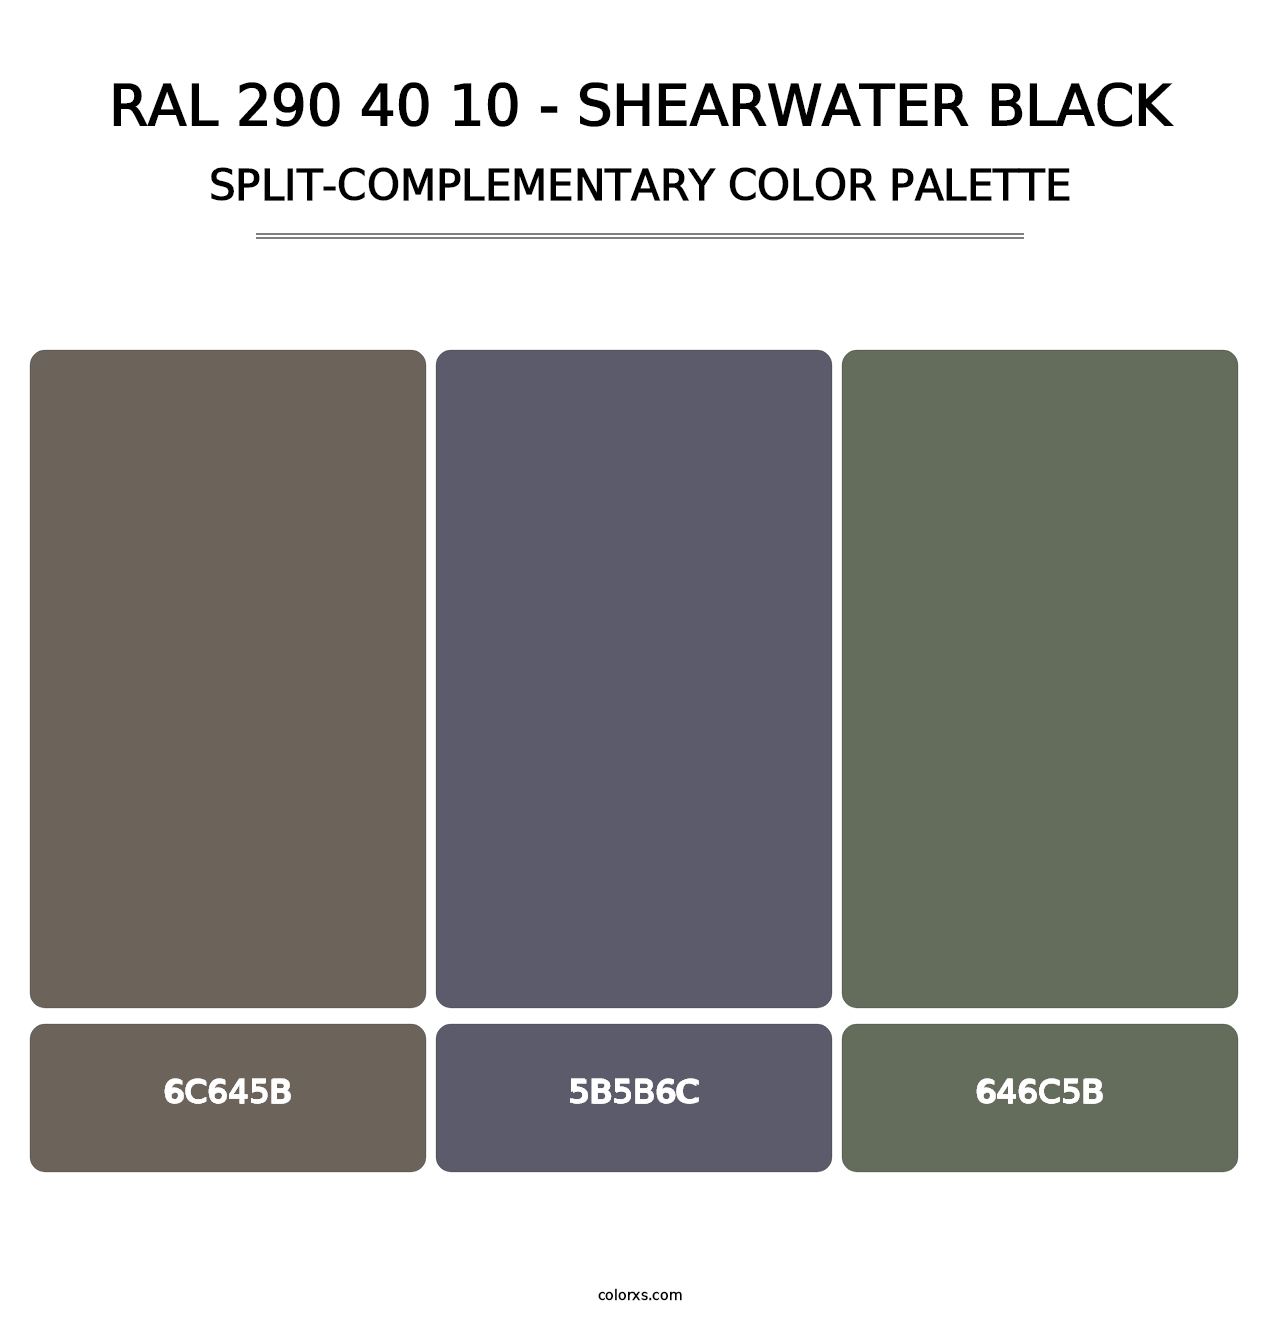 RAL 290 40 10 - Shearwater Black - Split-Complementary Color Palette